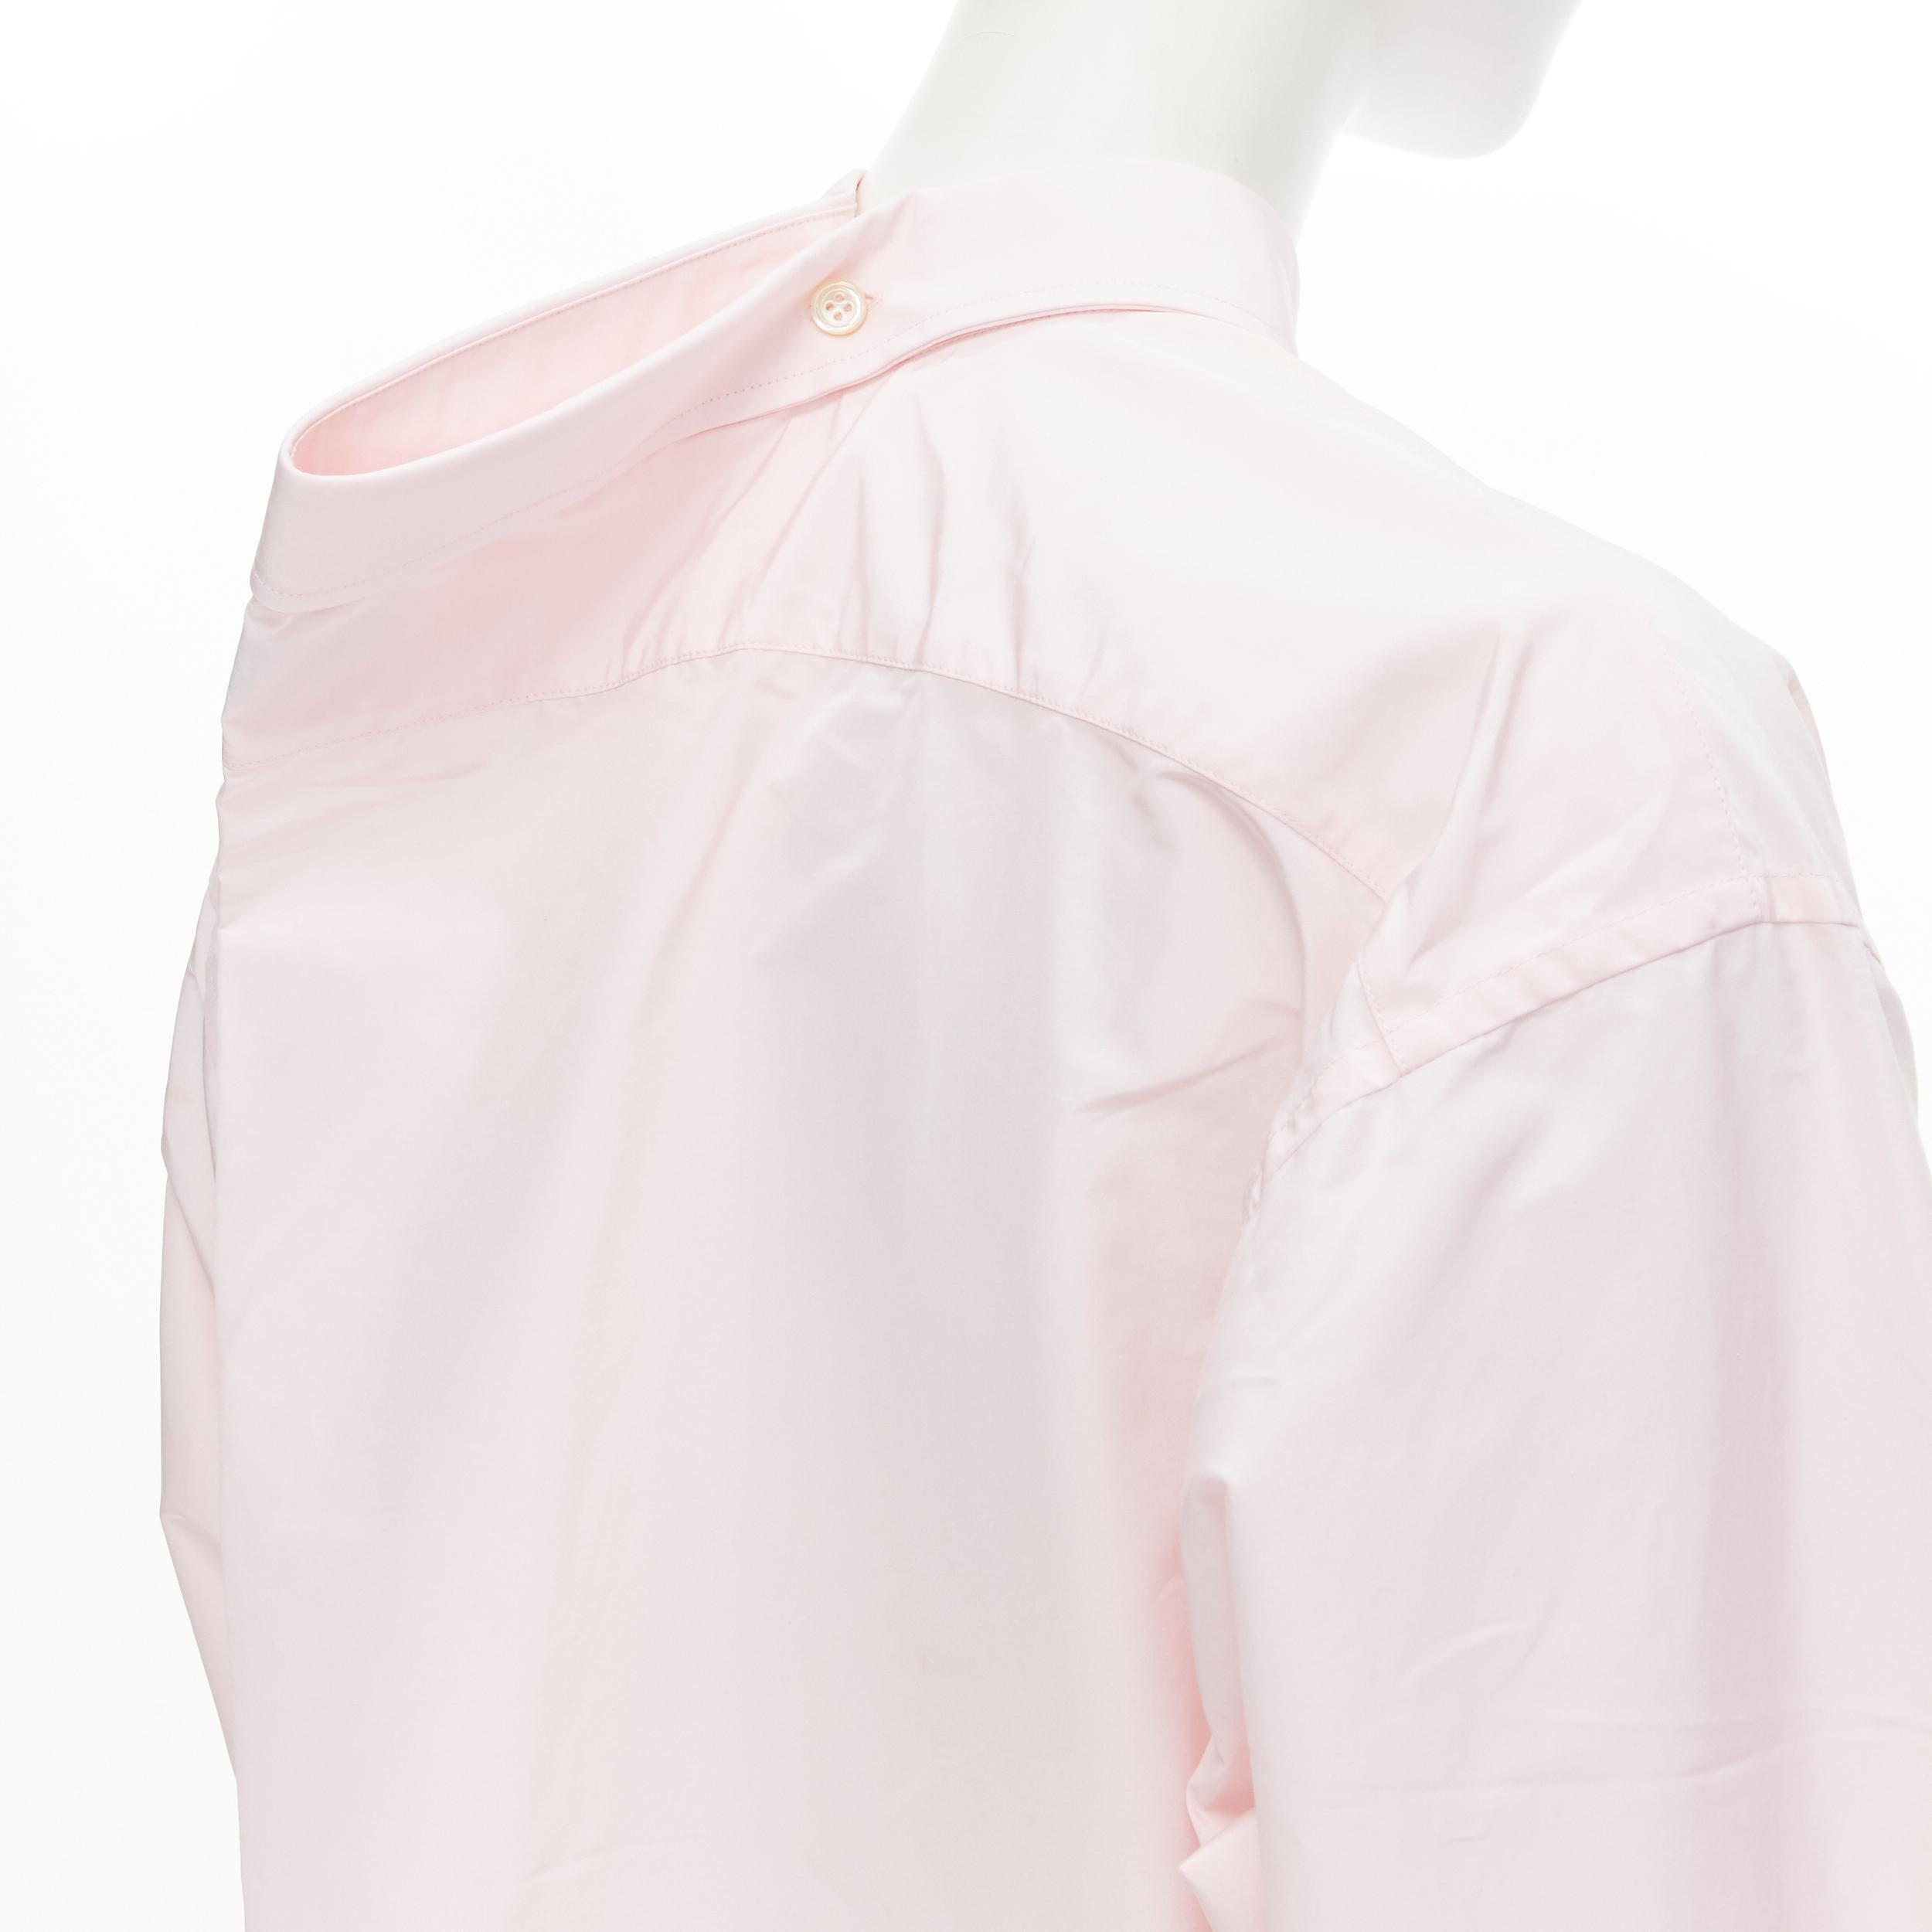 BALENCIAGA 2016 pink button pinched collar oversized shirt FR38 S 
Reference: MELK/A00122 
Brand: Balenciaga 
Designer: Demna 
Collection: 2016 
Material: Cotton 
Color: Pink 
Pattern: Solid 
Closure: Button 
Extra Detail: Oversized collar with